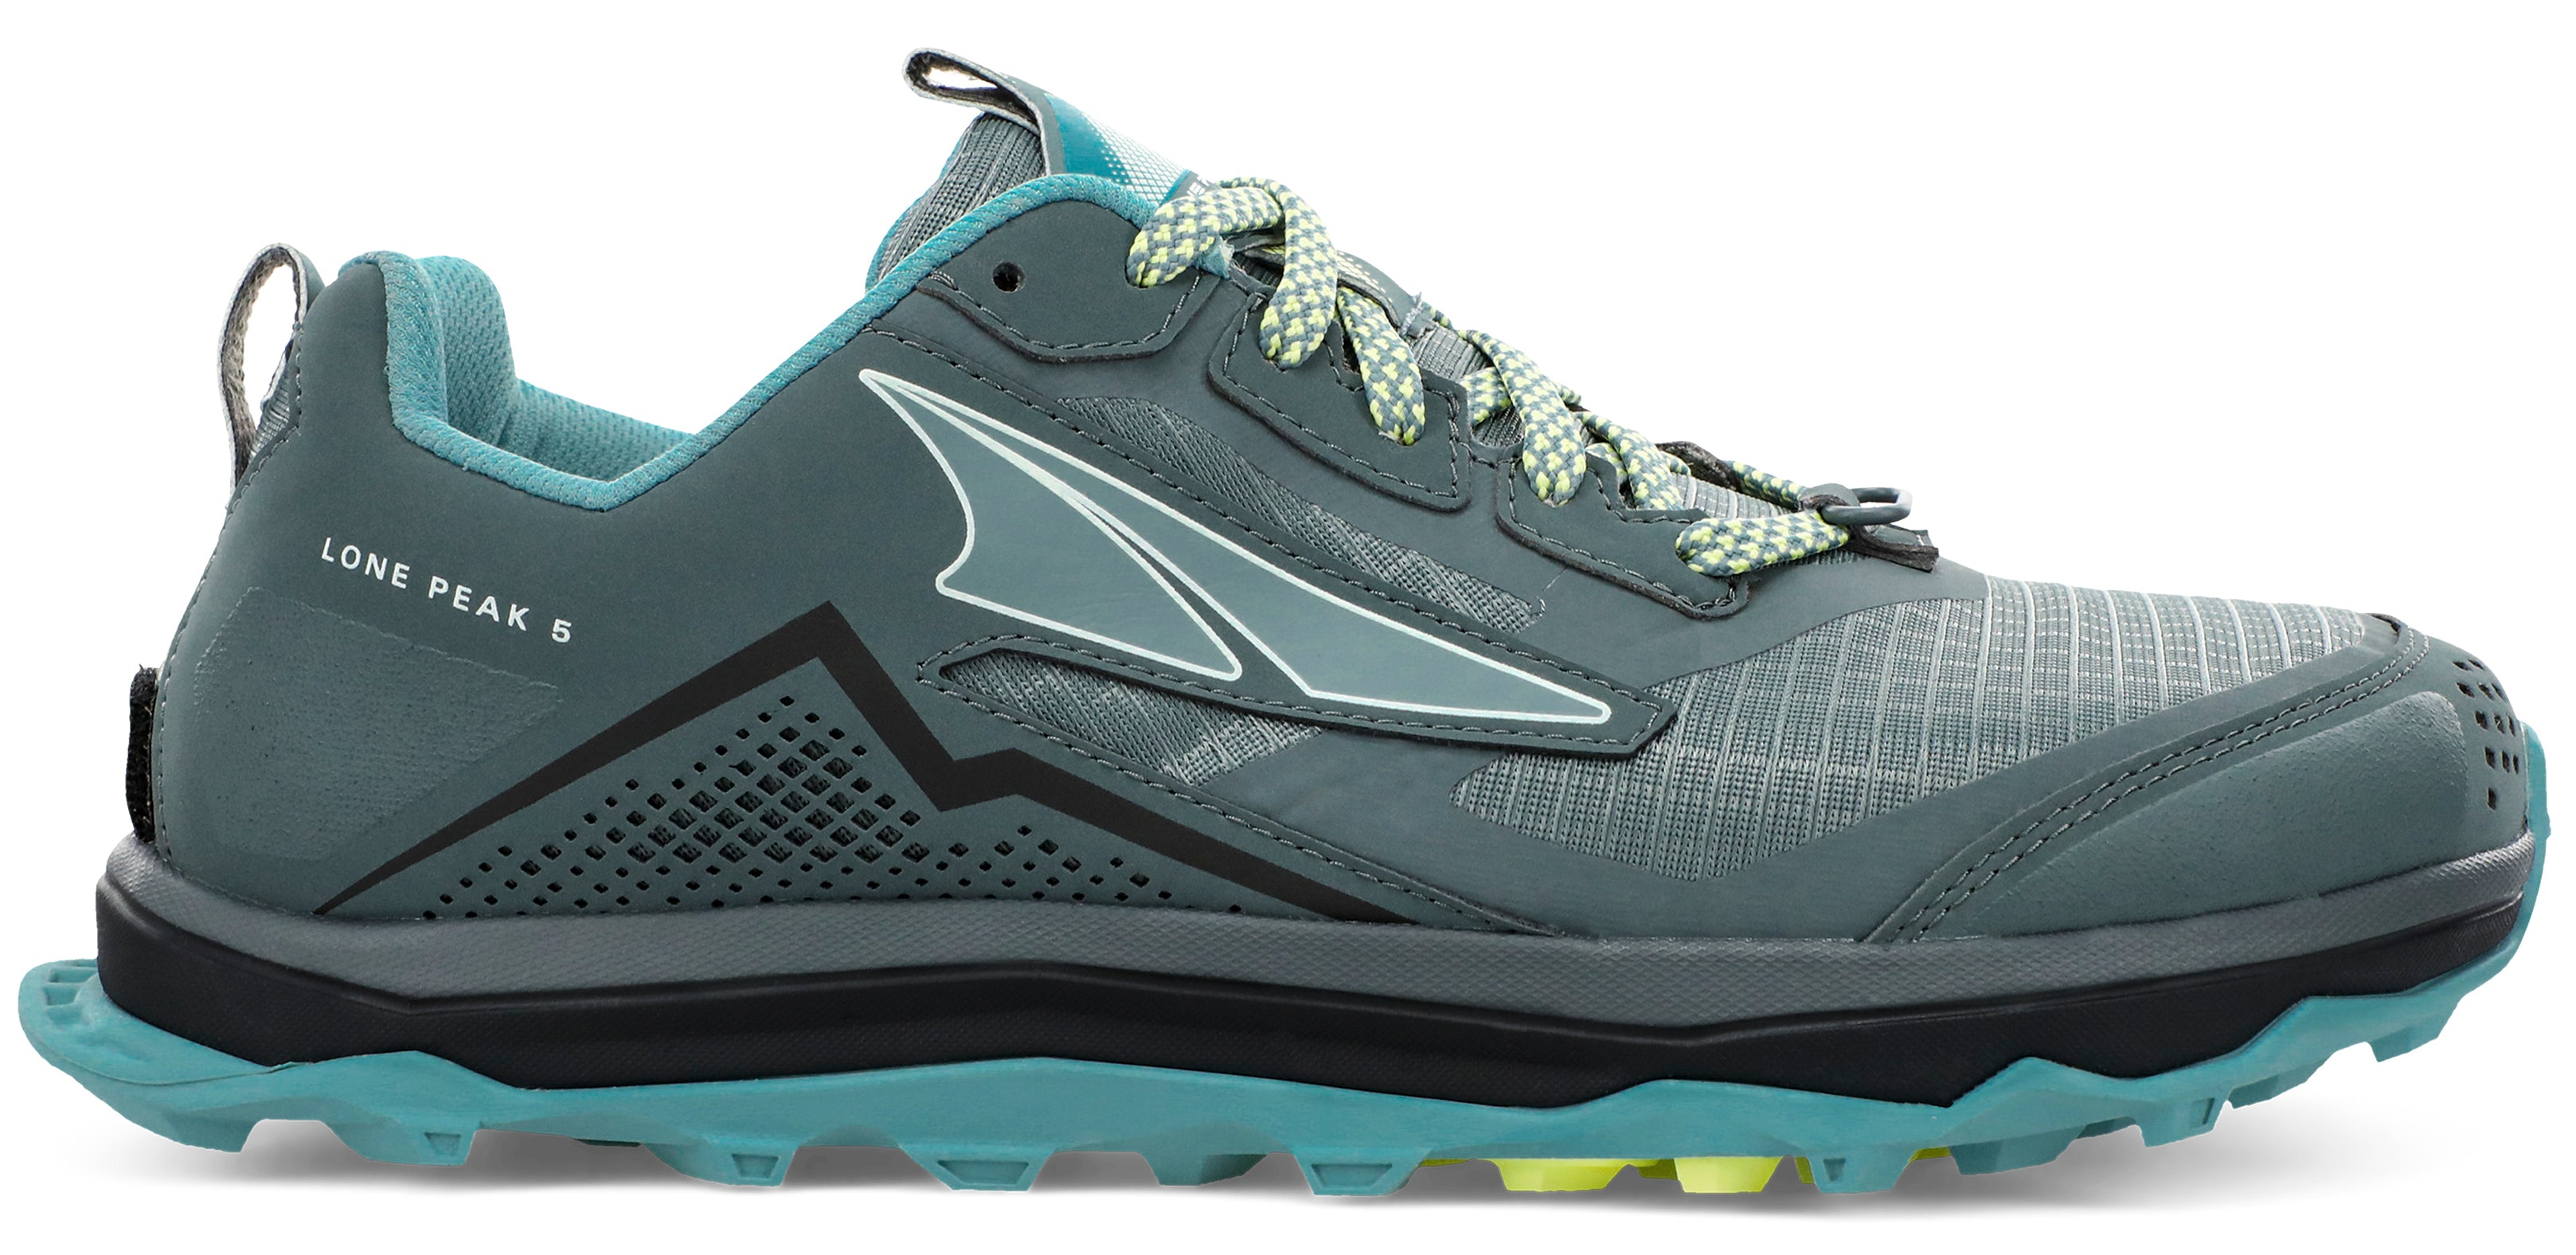 Altra Women's Lone Peak 5 Trail Running Shoe in Balsam Green from the side